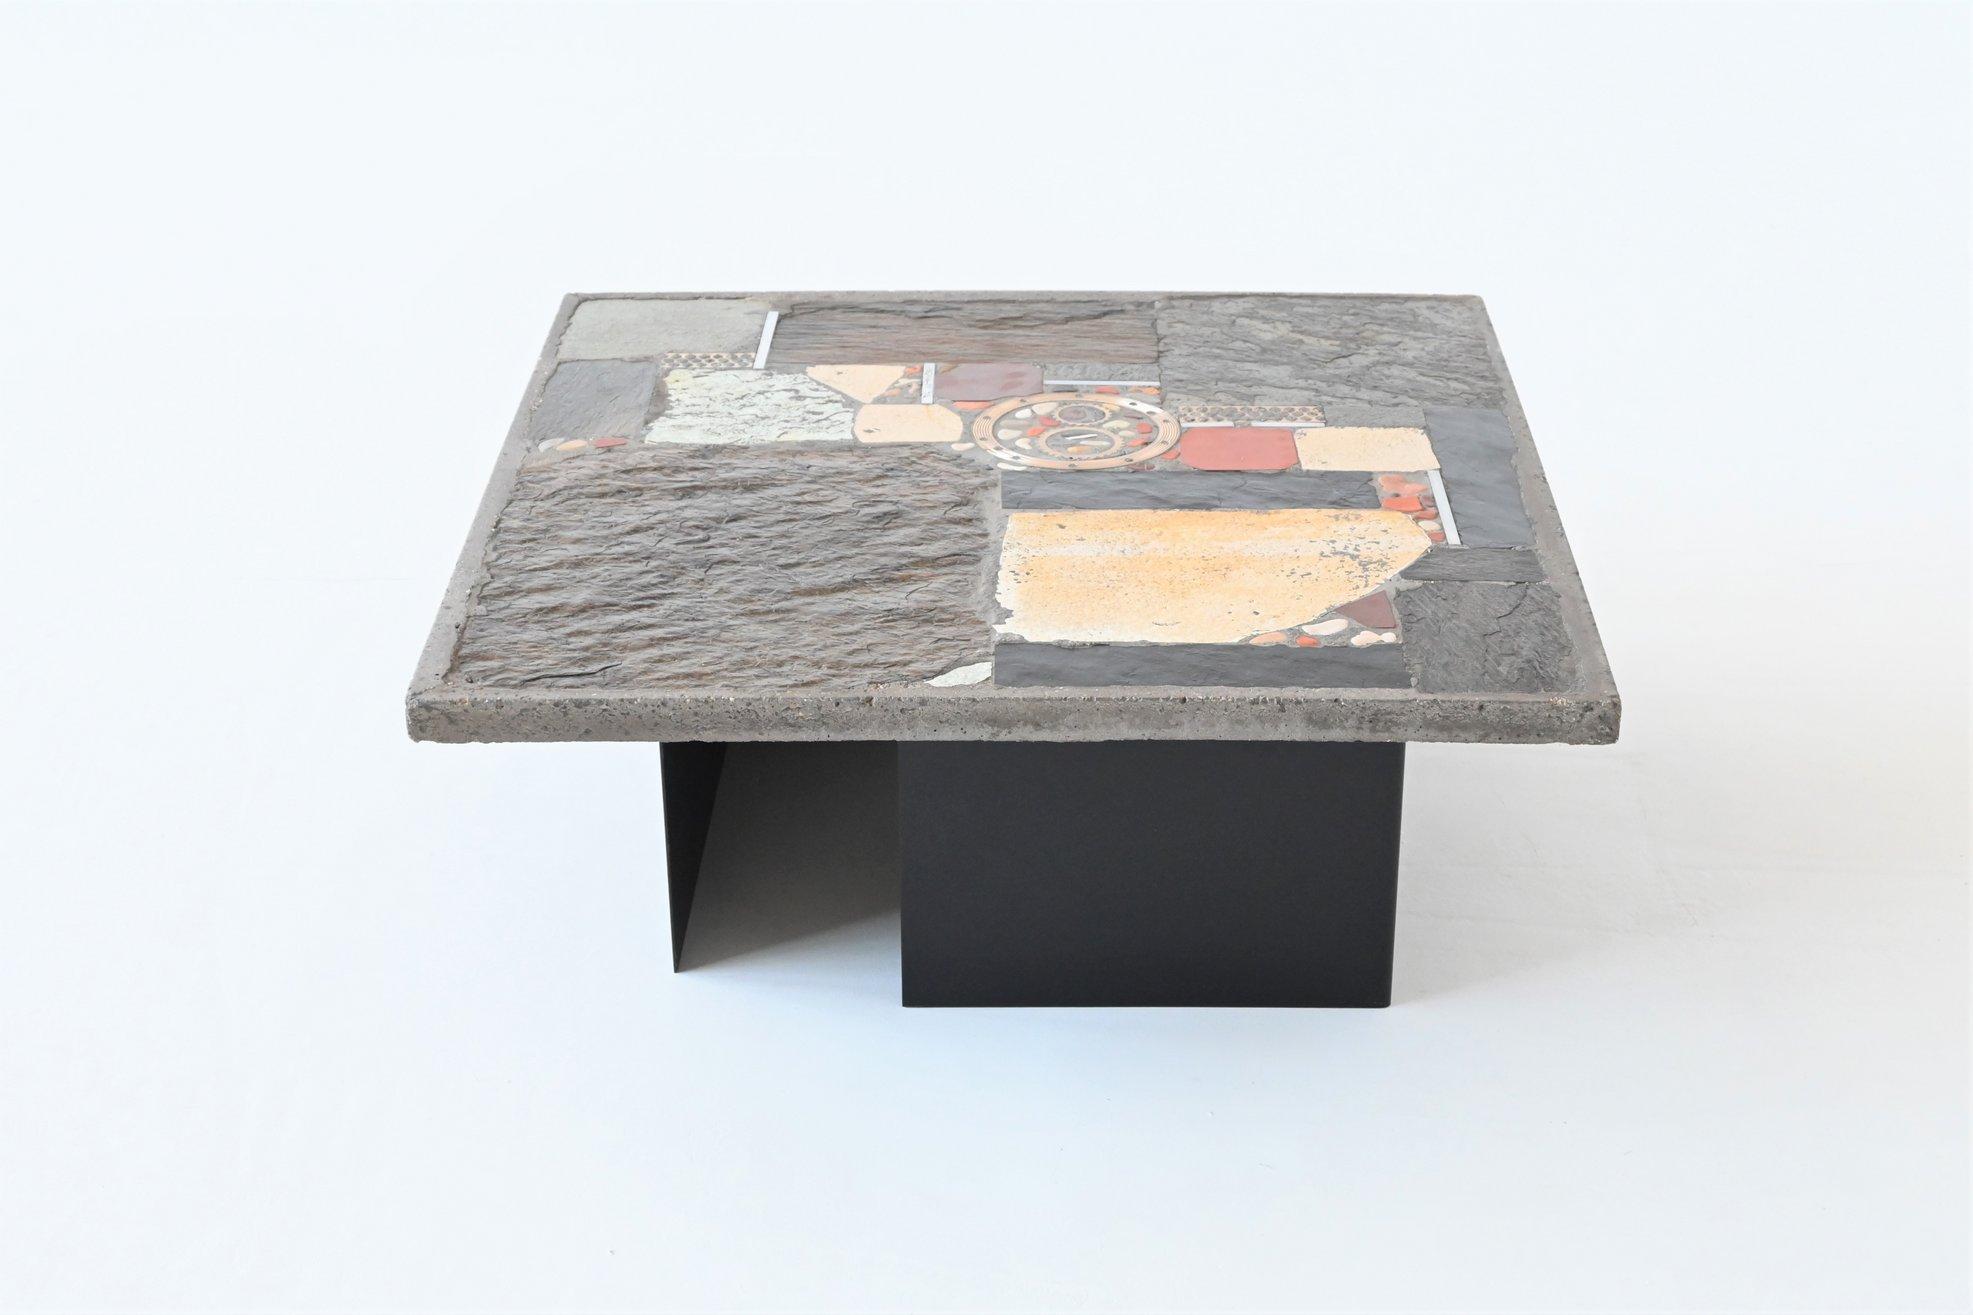 Beautiful square shaped coffee table designed and made by Marcus Kingma, The Netherlands 1974. The grey colored heavy and thick concrete top rests on two metal bases that are black lacquered. Beautiful composition of slate, stones, copper, brass and